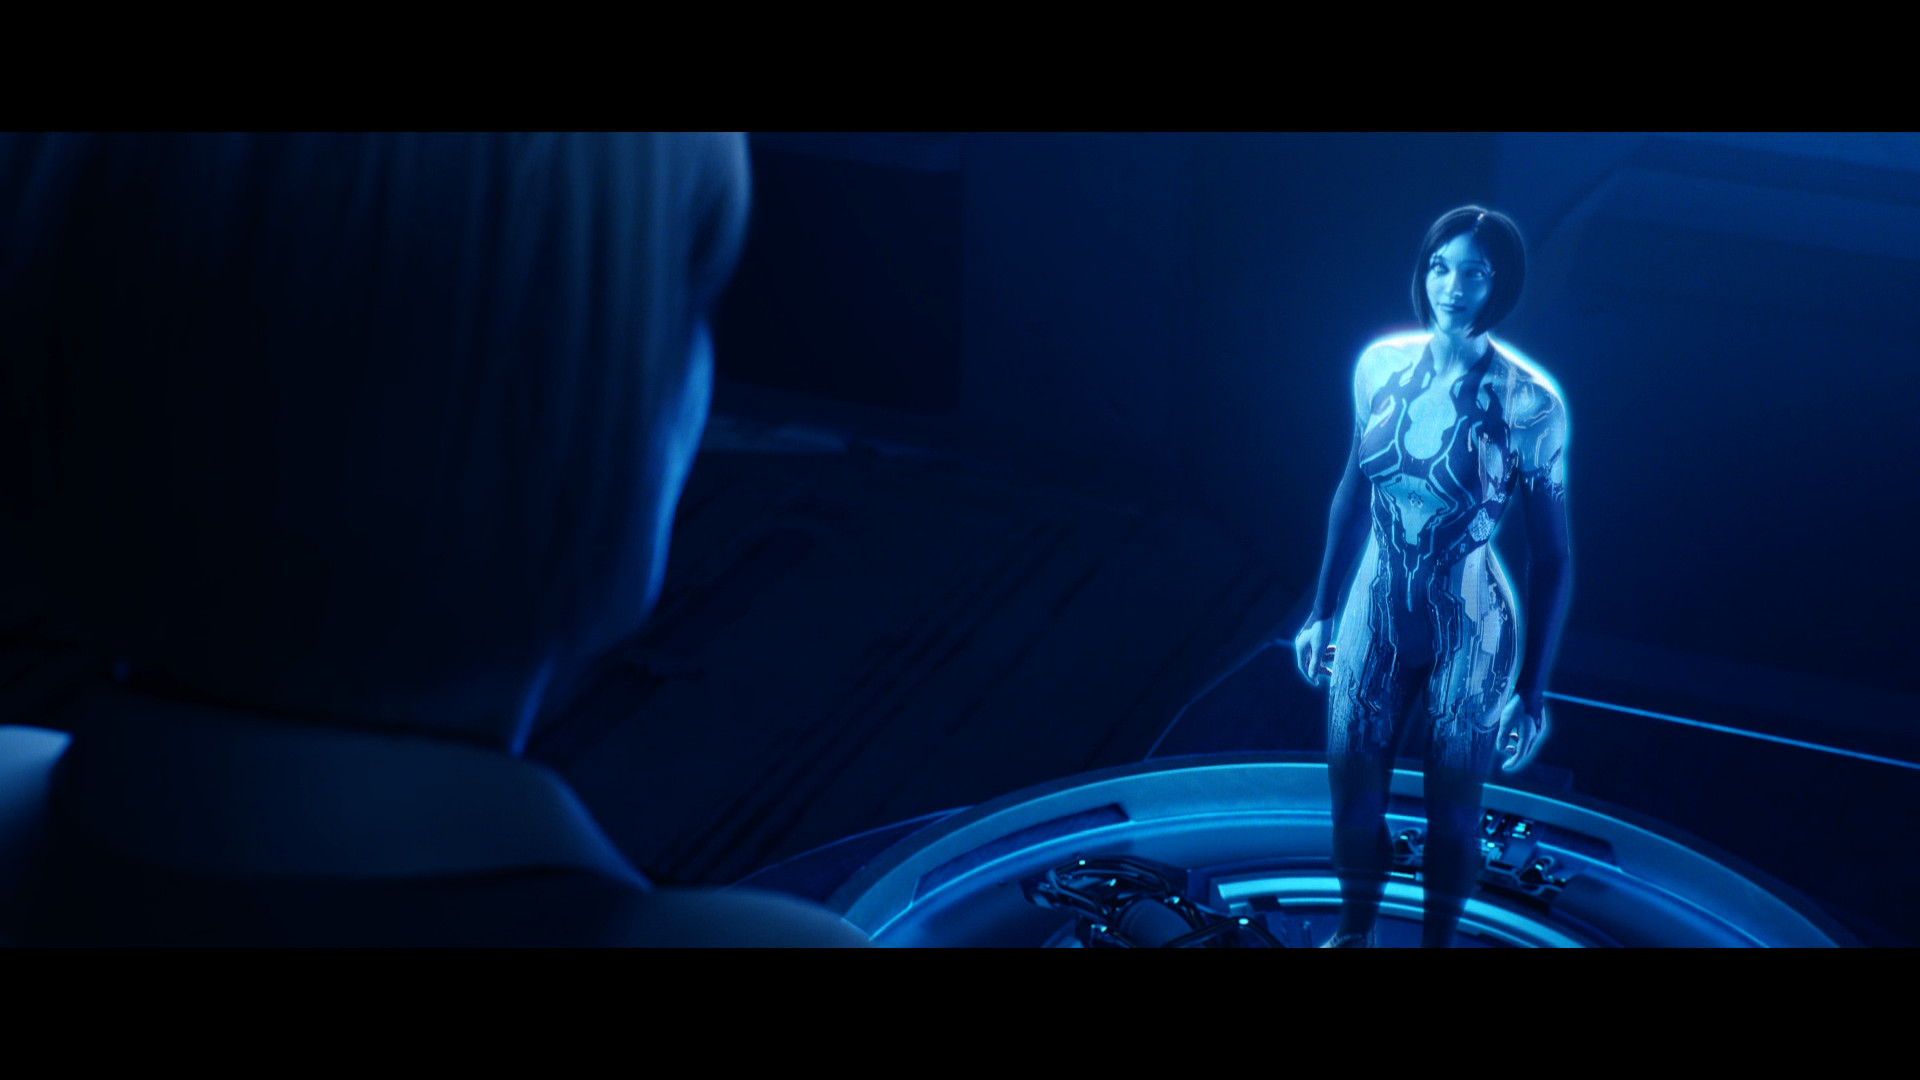 Halo 4 Cortana Wallpaper 75 Pictures